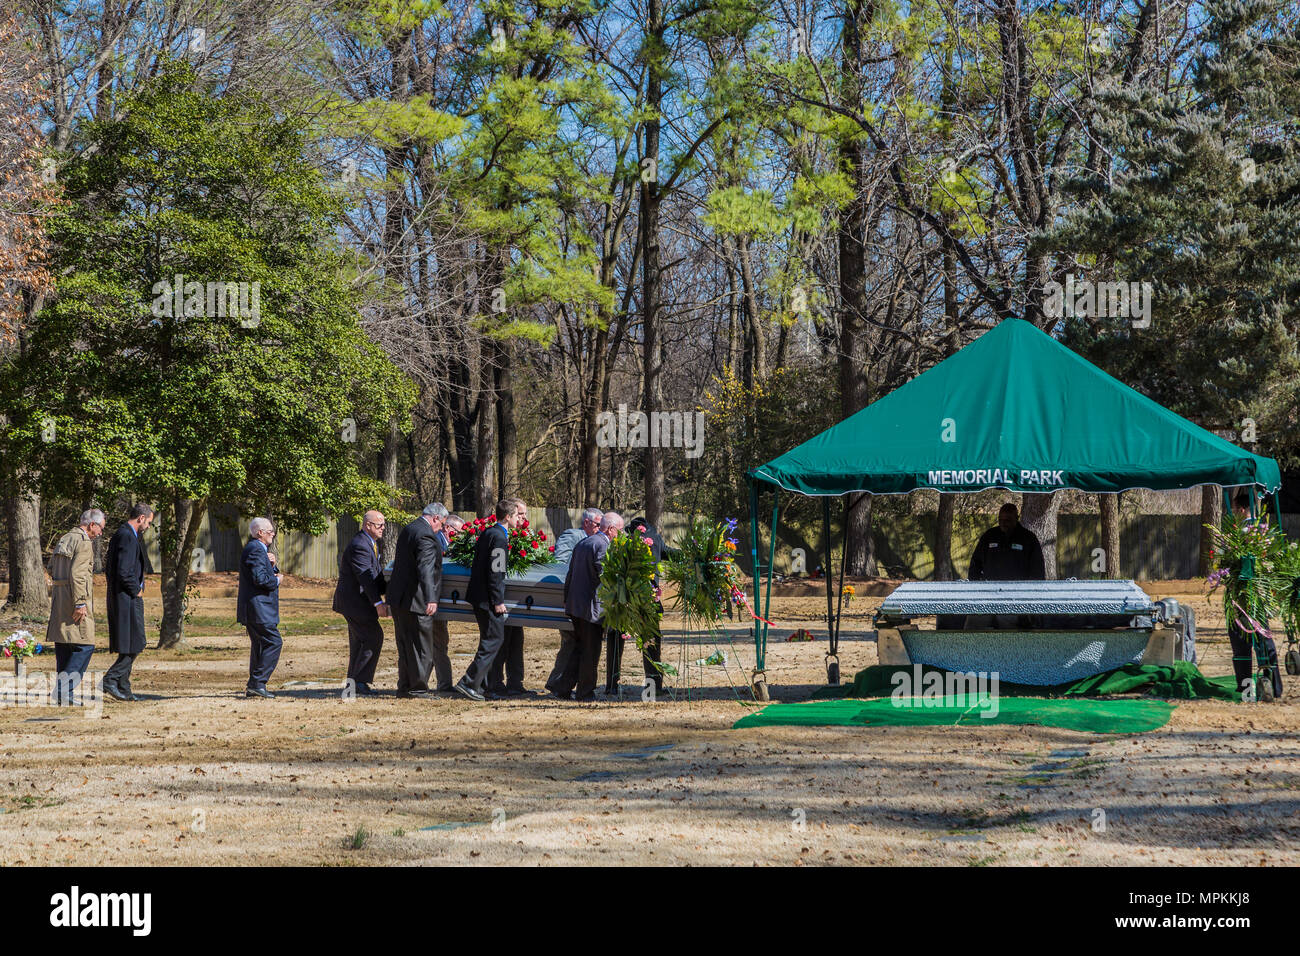 Poll bearers carry a flower draped casket to the burial site in a Memphis, Tennessee memorial park Stock Photo